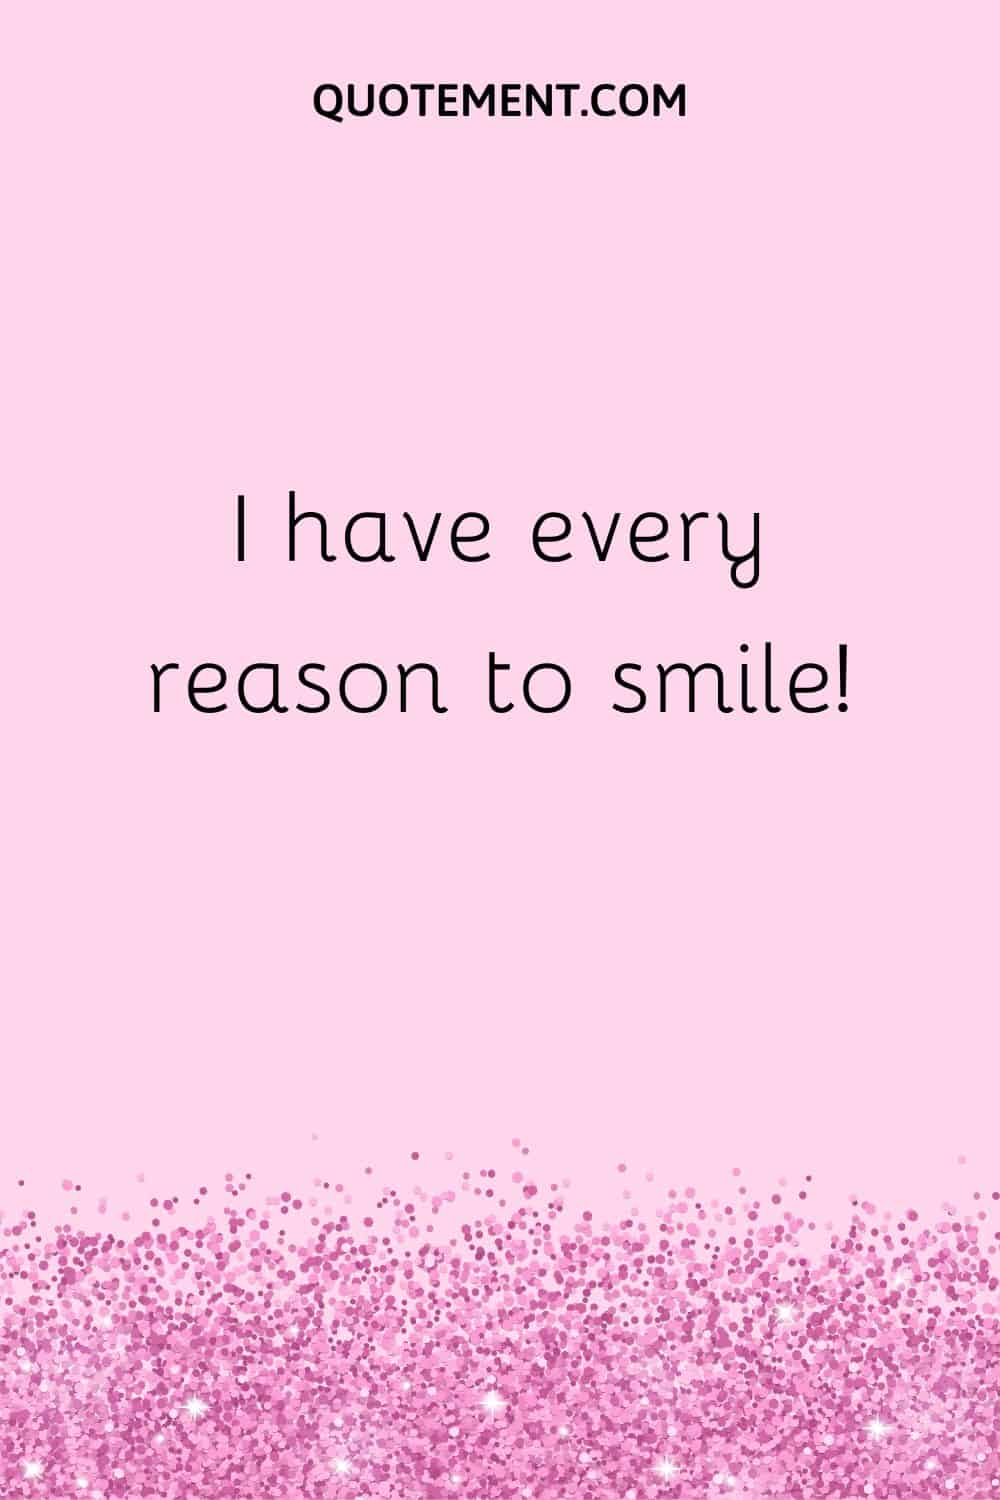 I have every reason to smile